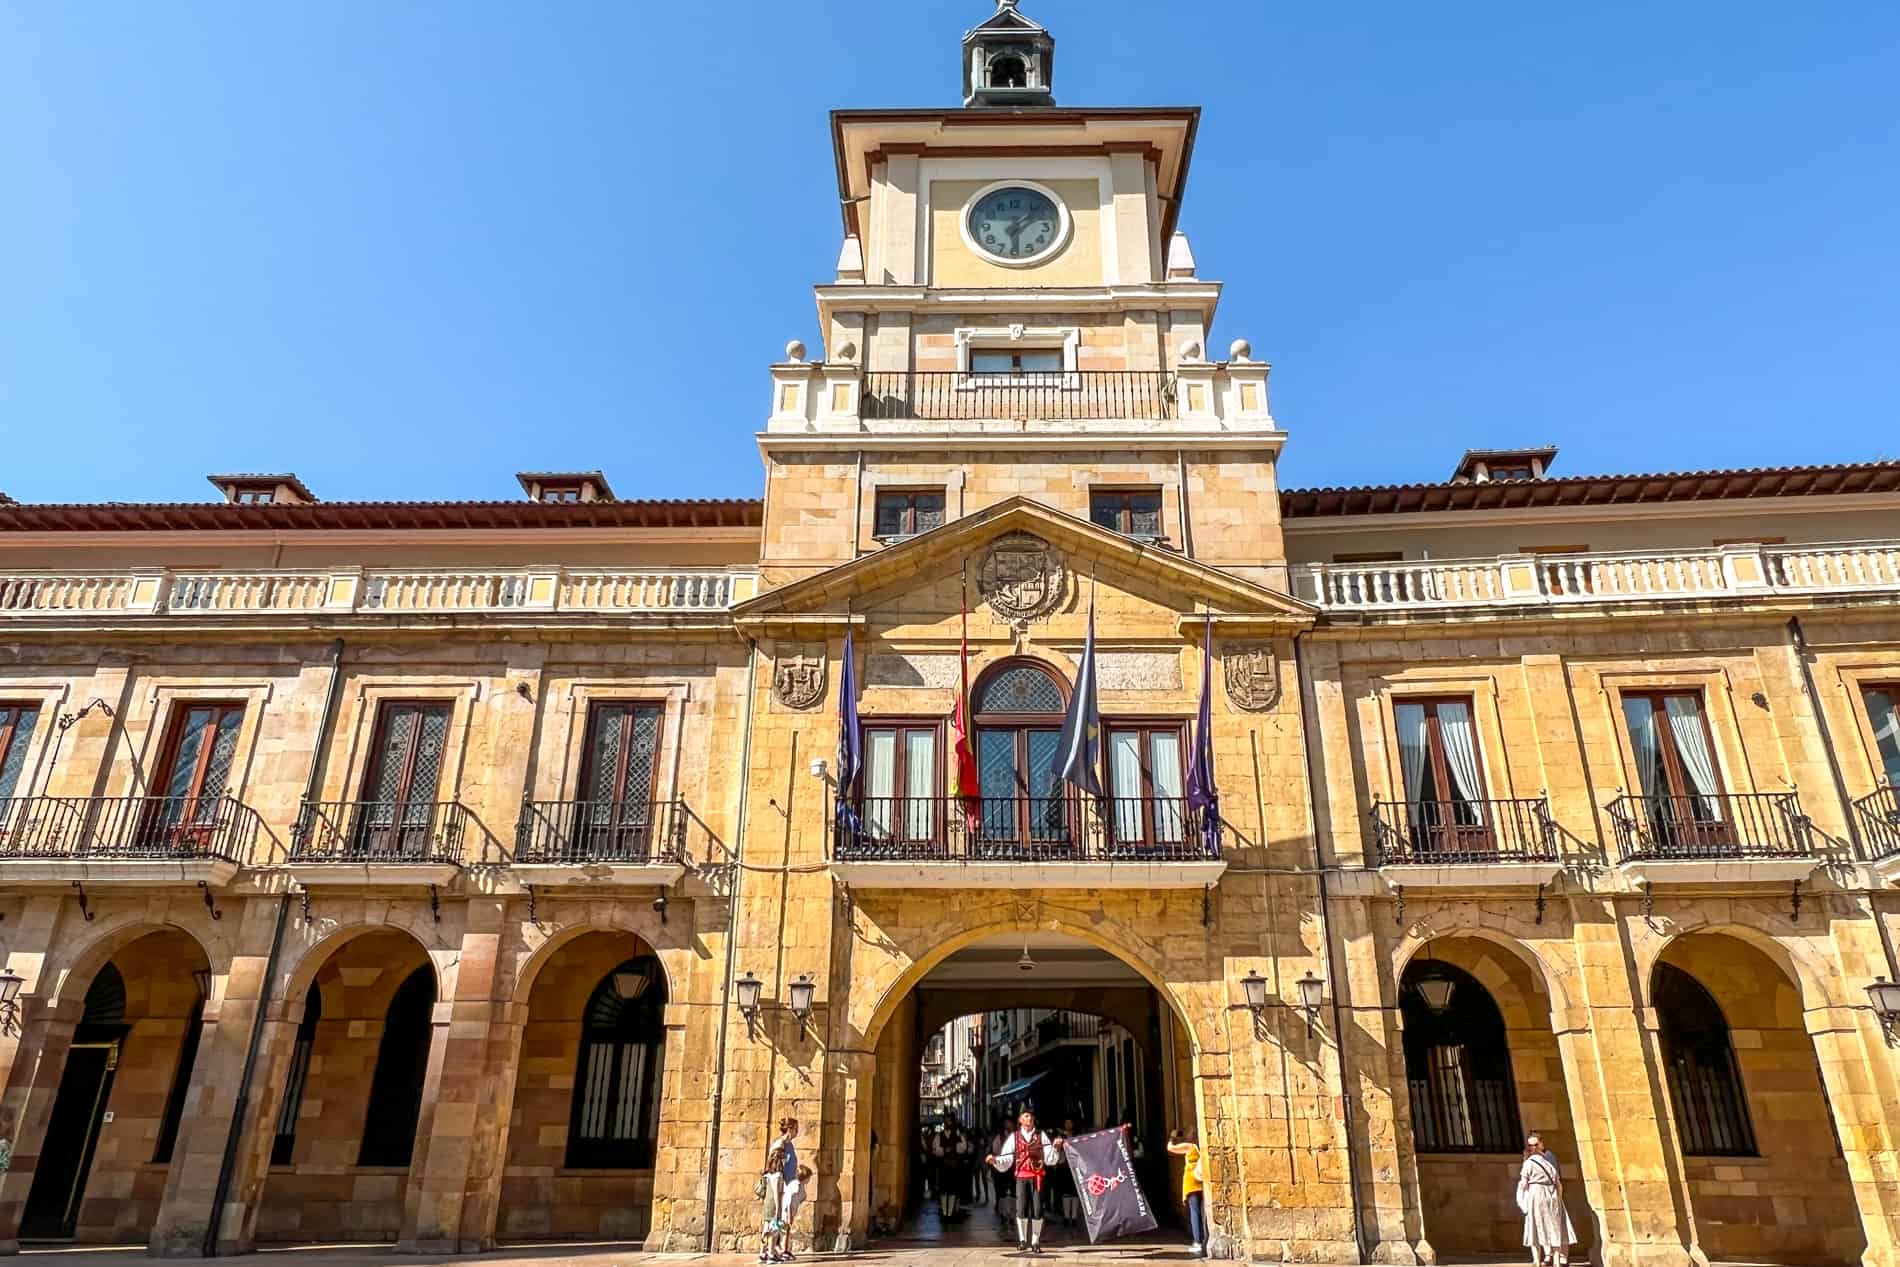 A long golden stone building with central clock tower is Oviedo's Town Hall. A man in traditional dress, holding a flag, stands in the archway. 